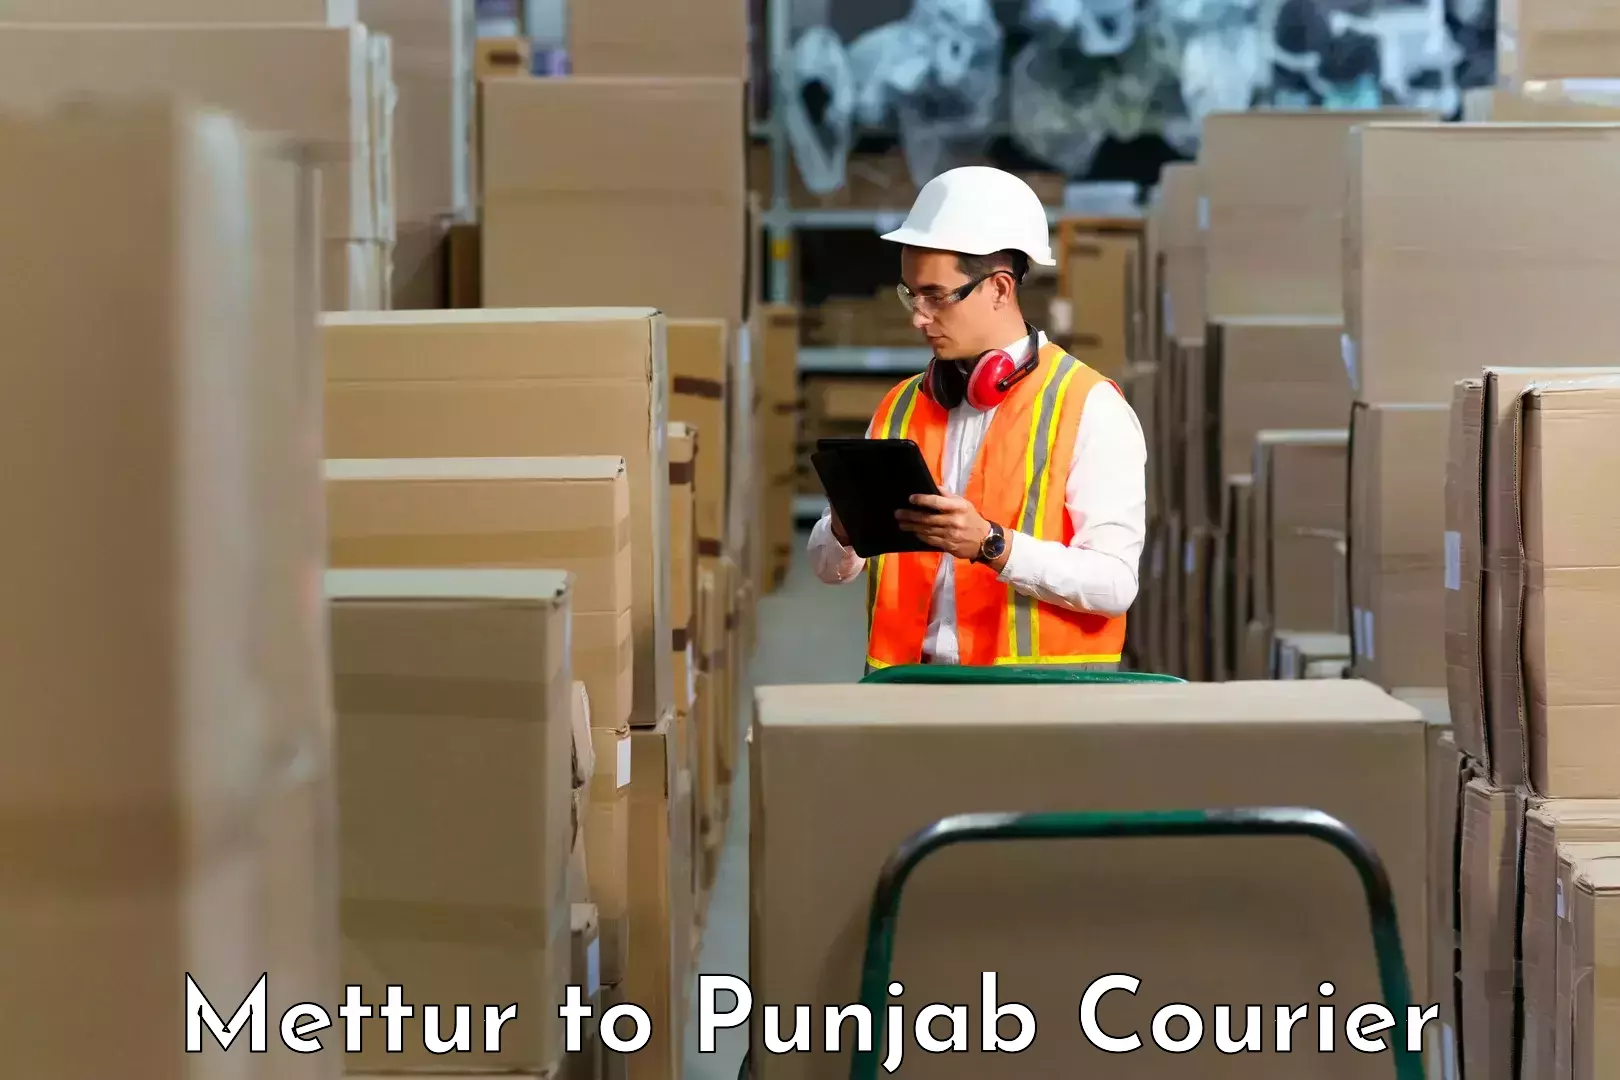 Efficient shipping operations Mettur to Punjab